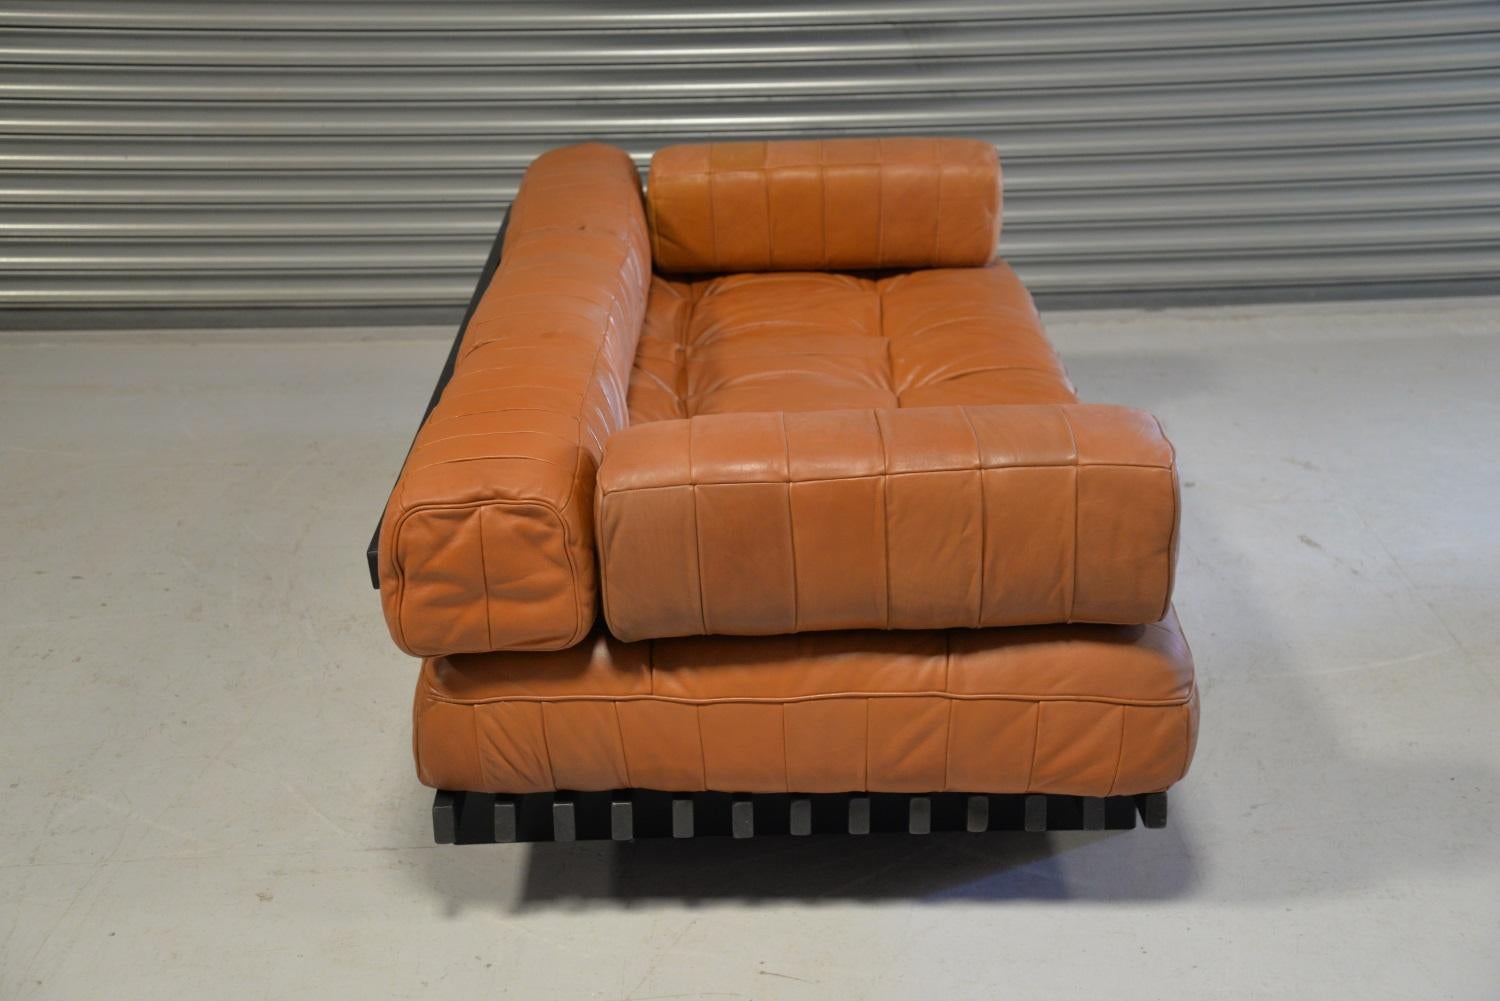 Vintage De Sede DS 80 Patchwork Leather Daybed, Switzerland, 1960s For Sale 1